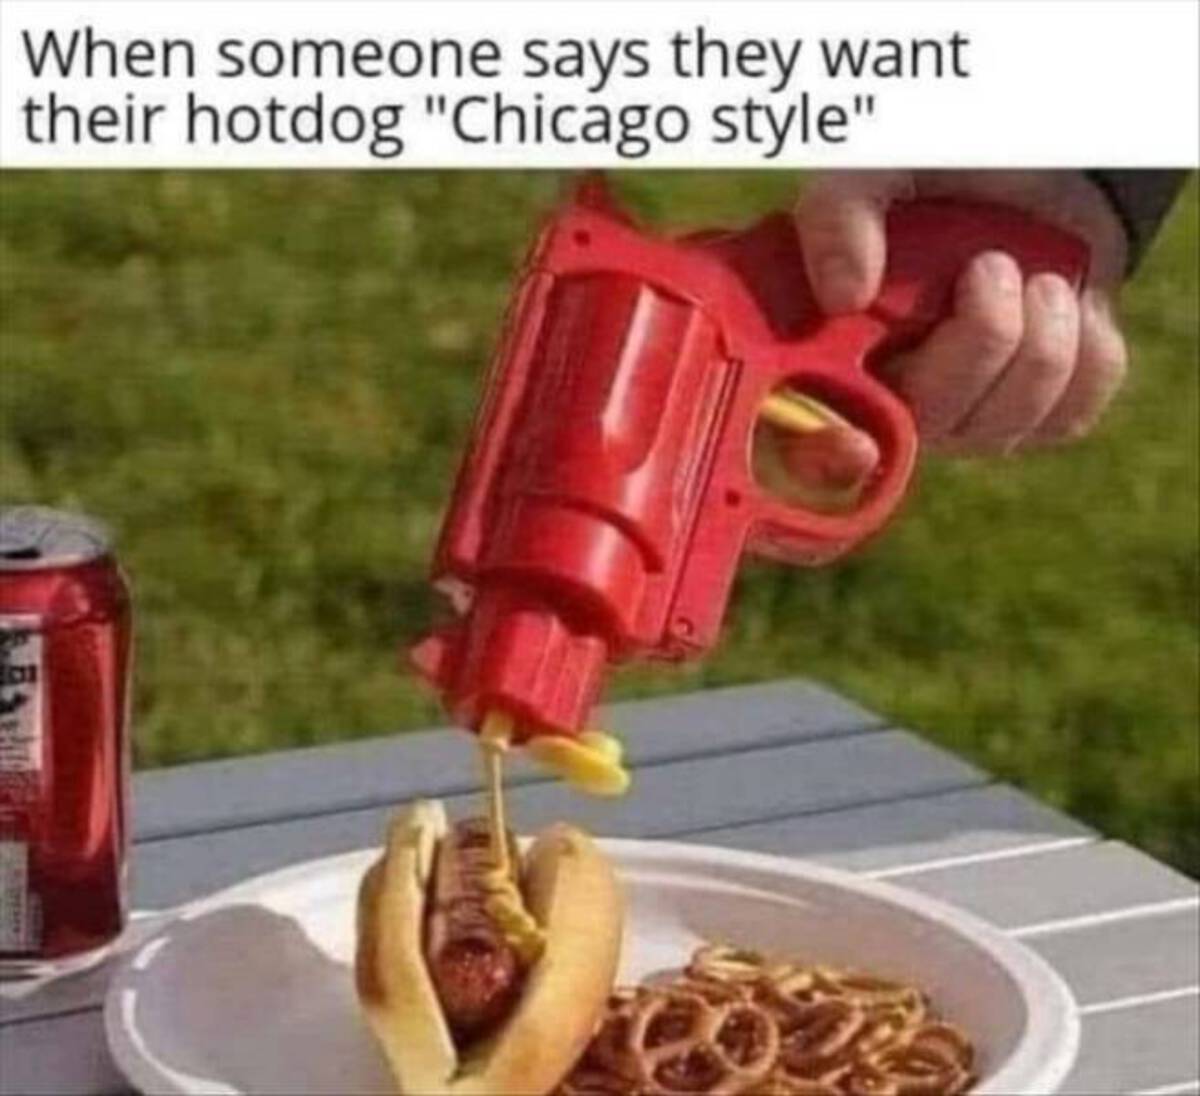 sauce gun - When someone says they want their hotdog "Chicago style"